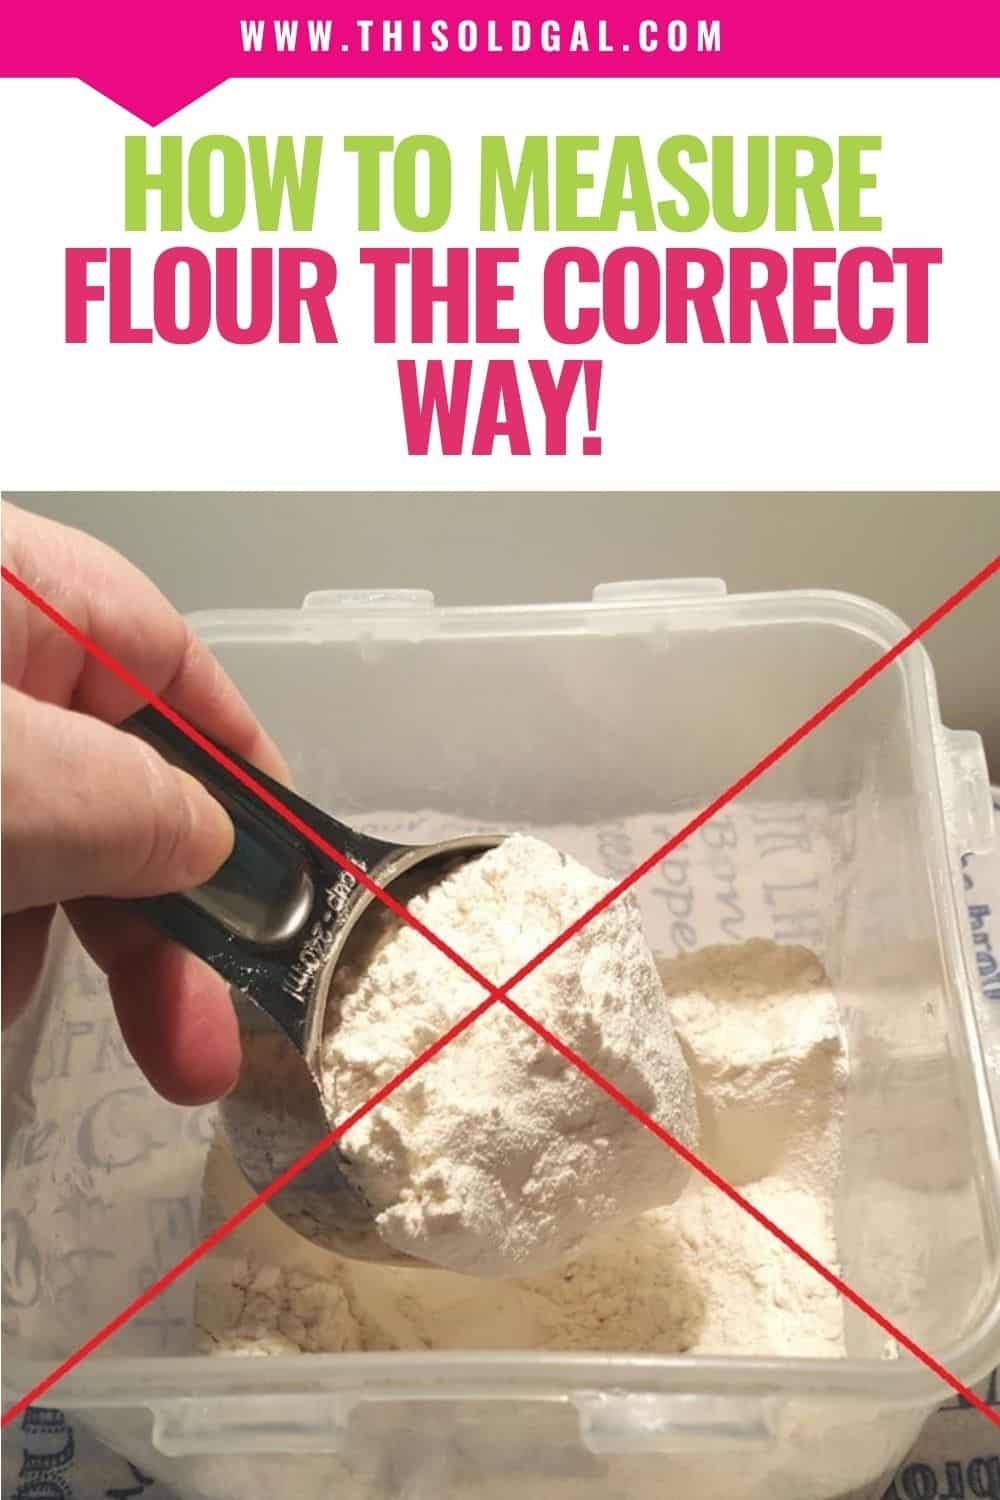 Learn How to Properly Measure Flour